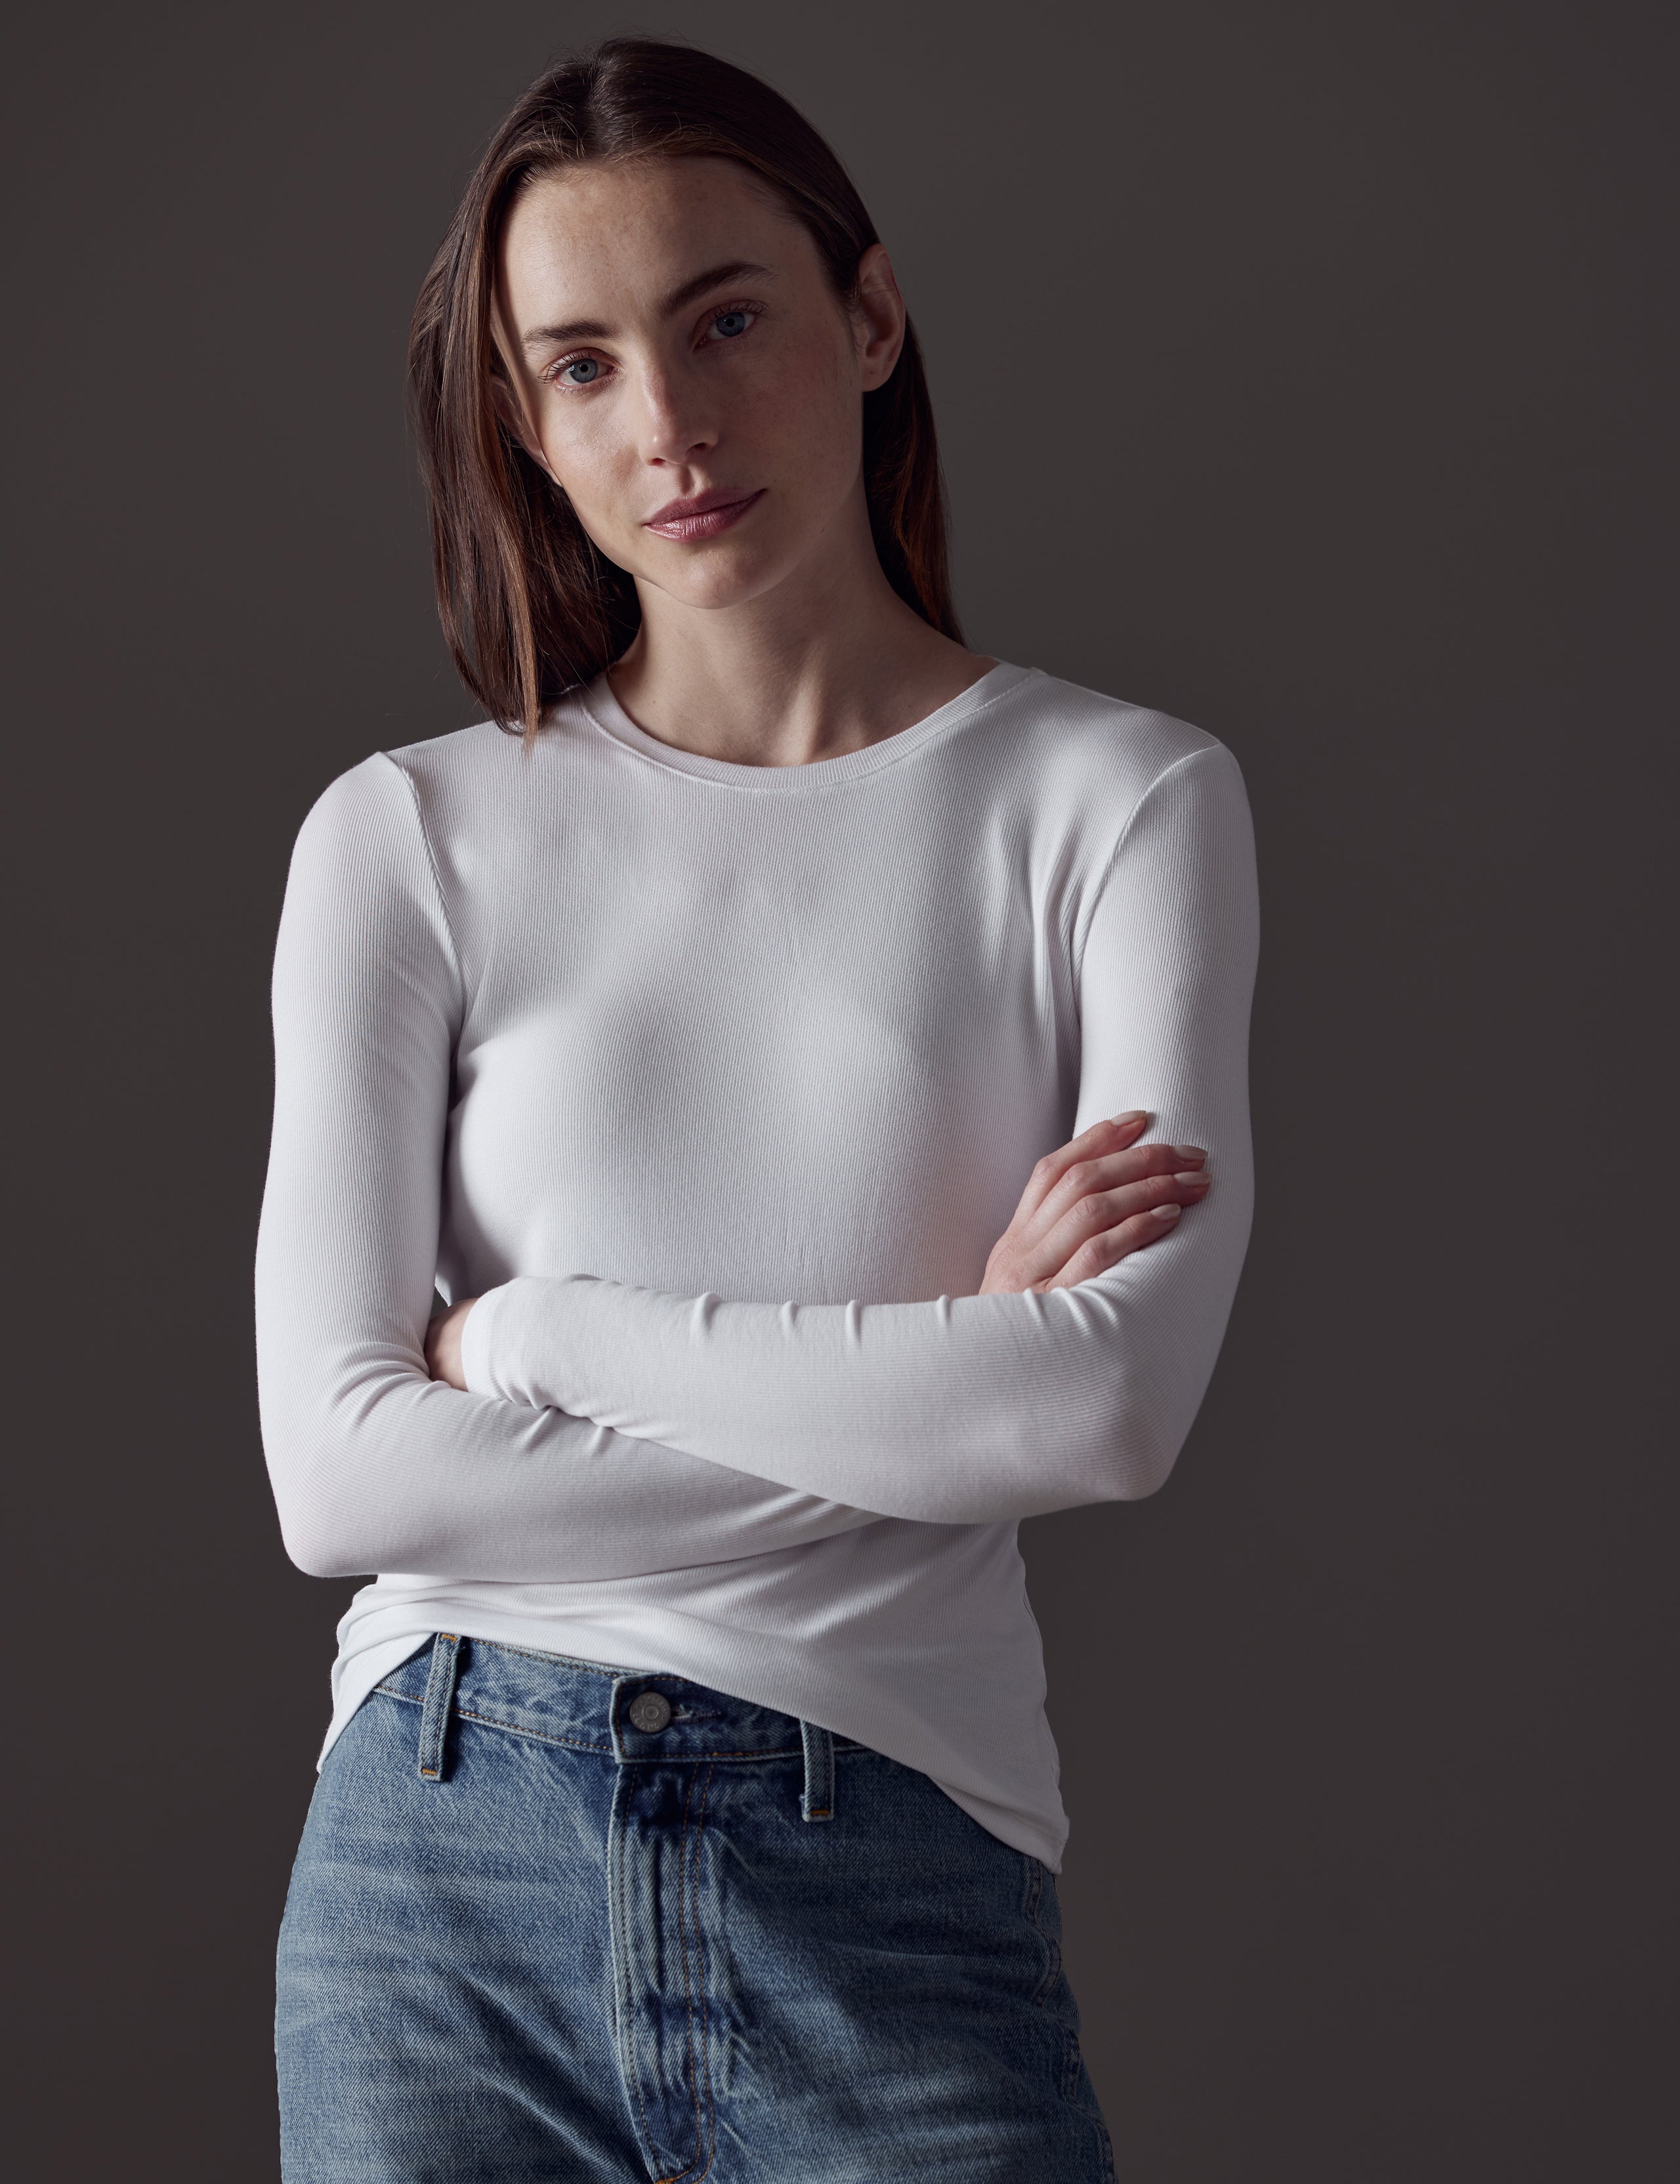 woman wearing white long-sleeve shirt from AETHER Apparel